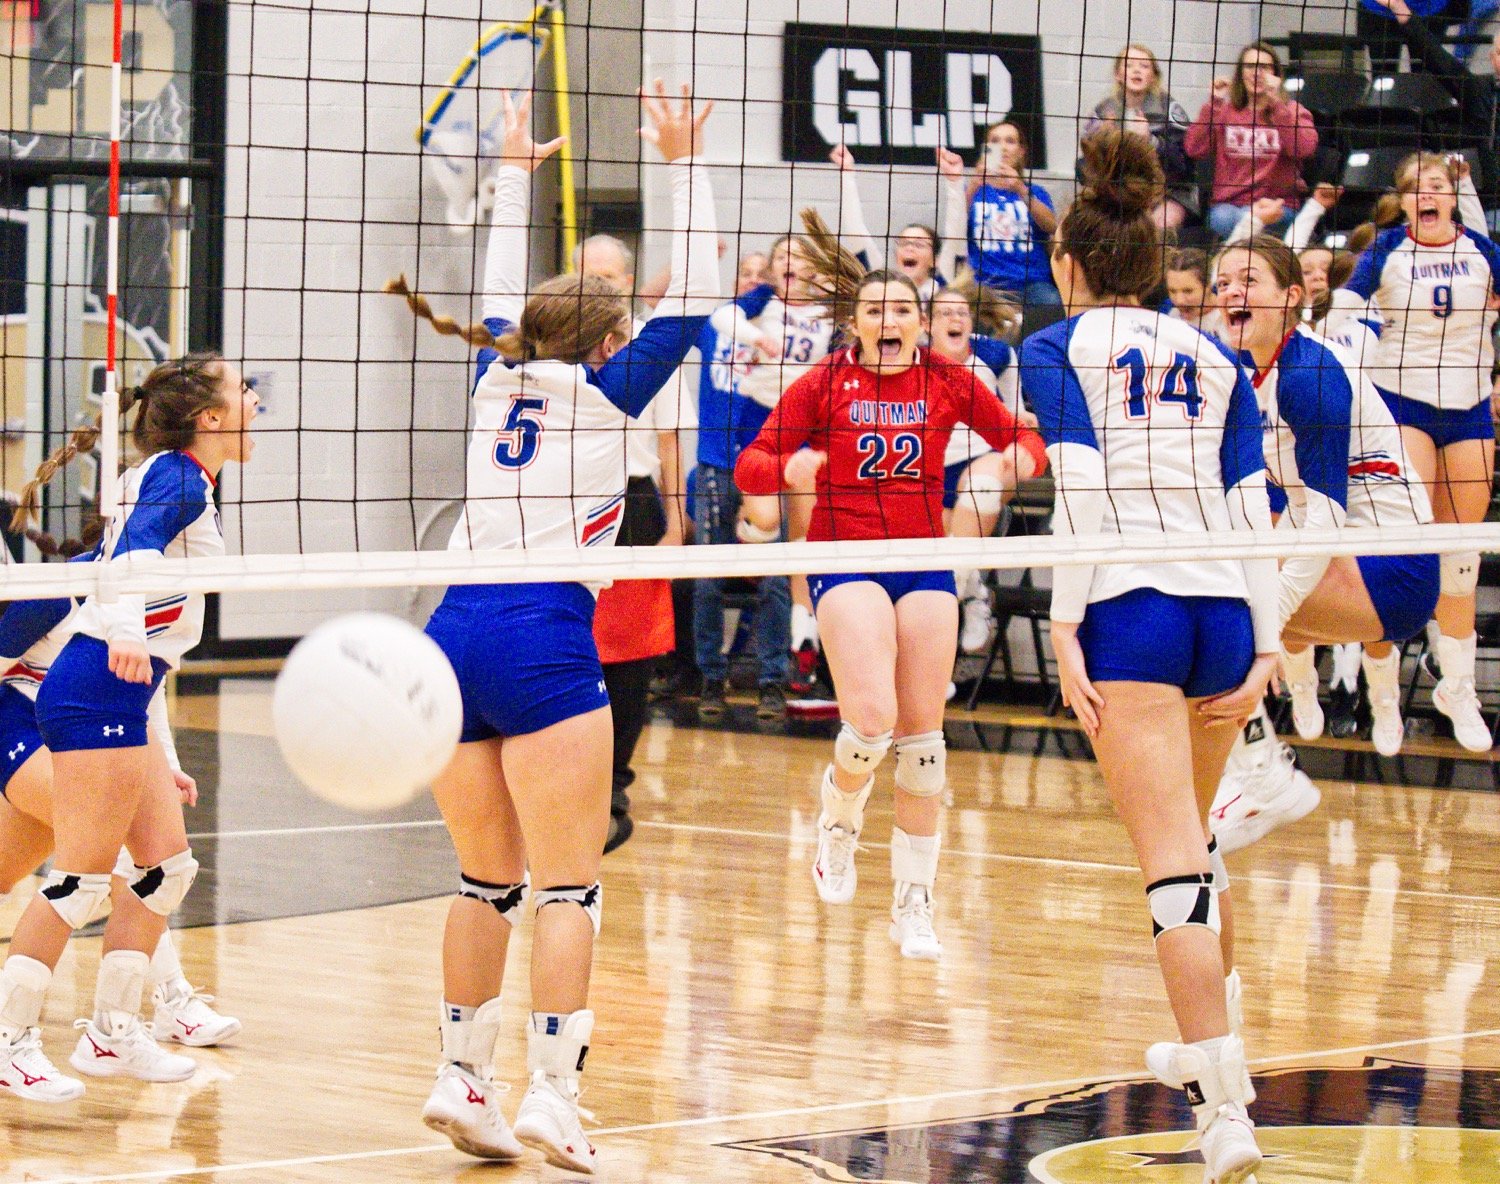 The Lady Bulldogs react to winning match point, prevailing over Redwater Nov. 1 to claim a bi-district title. [See the entire set of photos.]